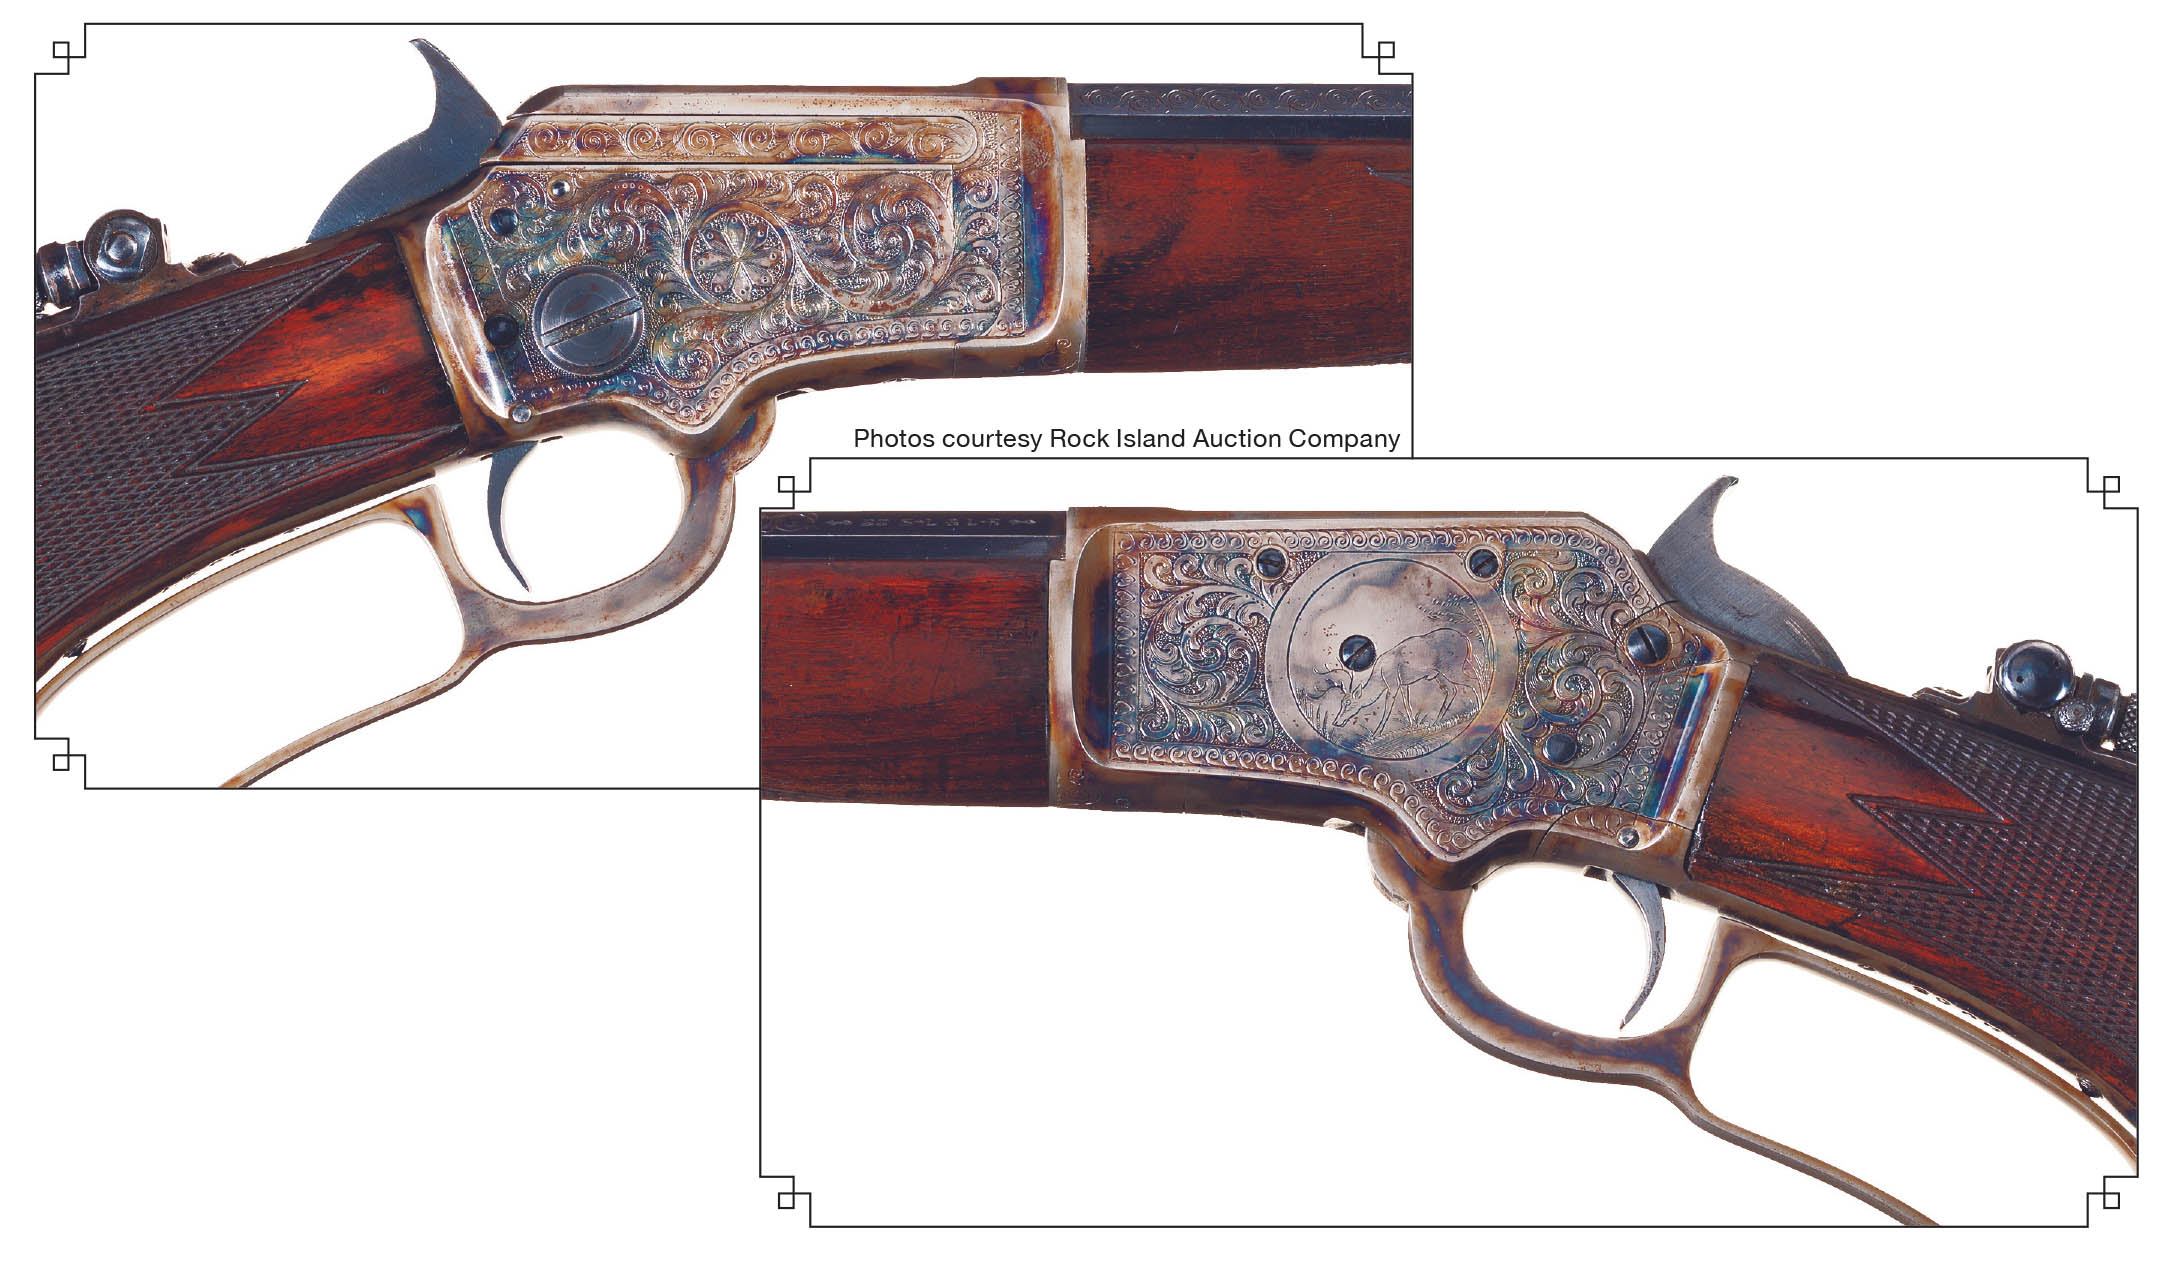 Beautiful engraving was available from Marlin on special order at various times in the company’s history. The Model 39’s construction of forged steel and American walnut lent itself to such embellishment. Photos courtesy Rock Island Auction Company